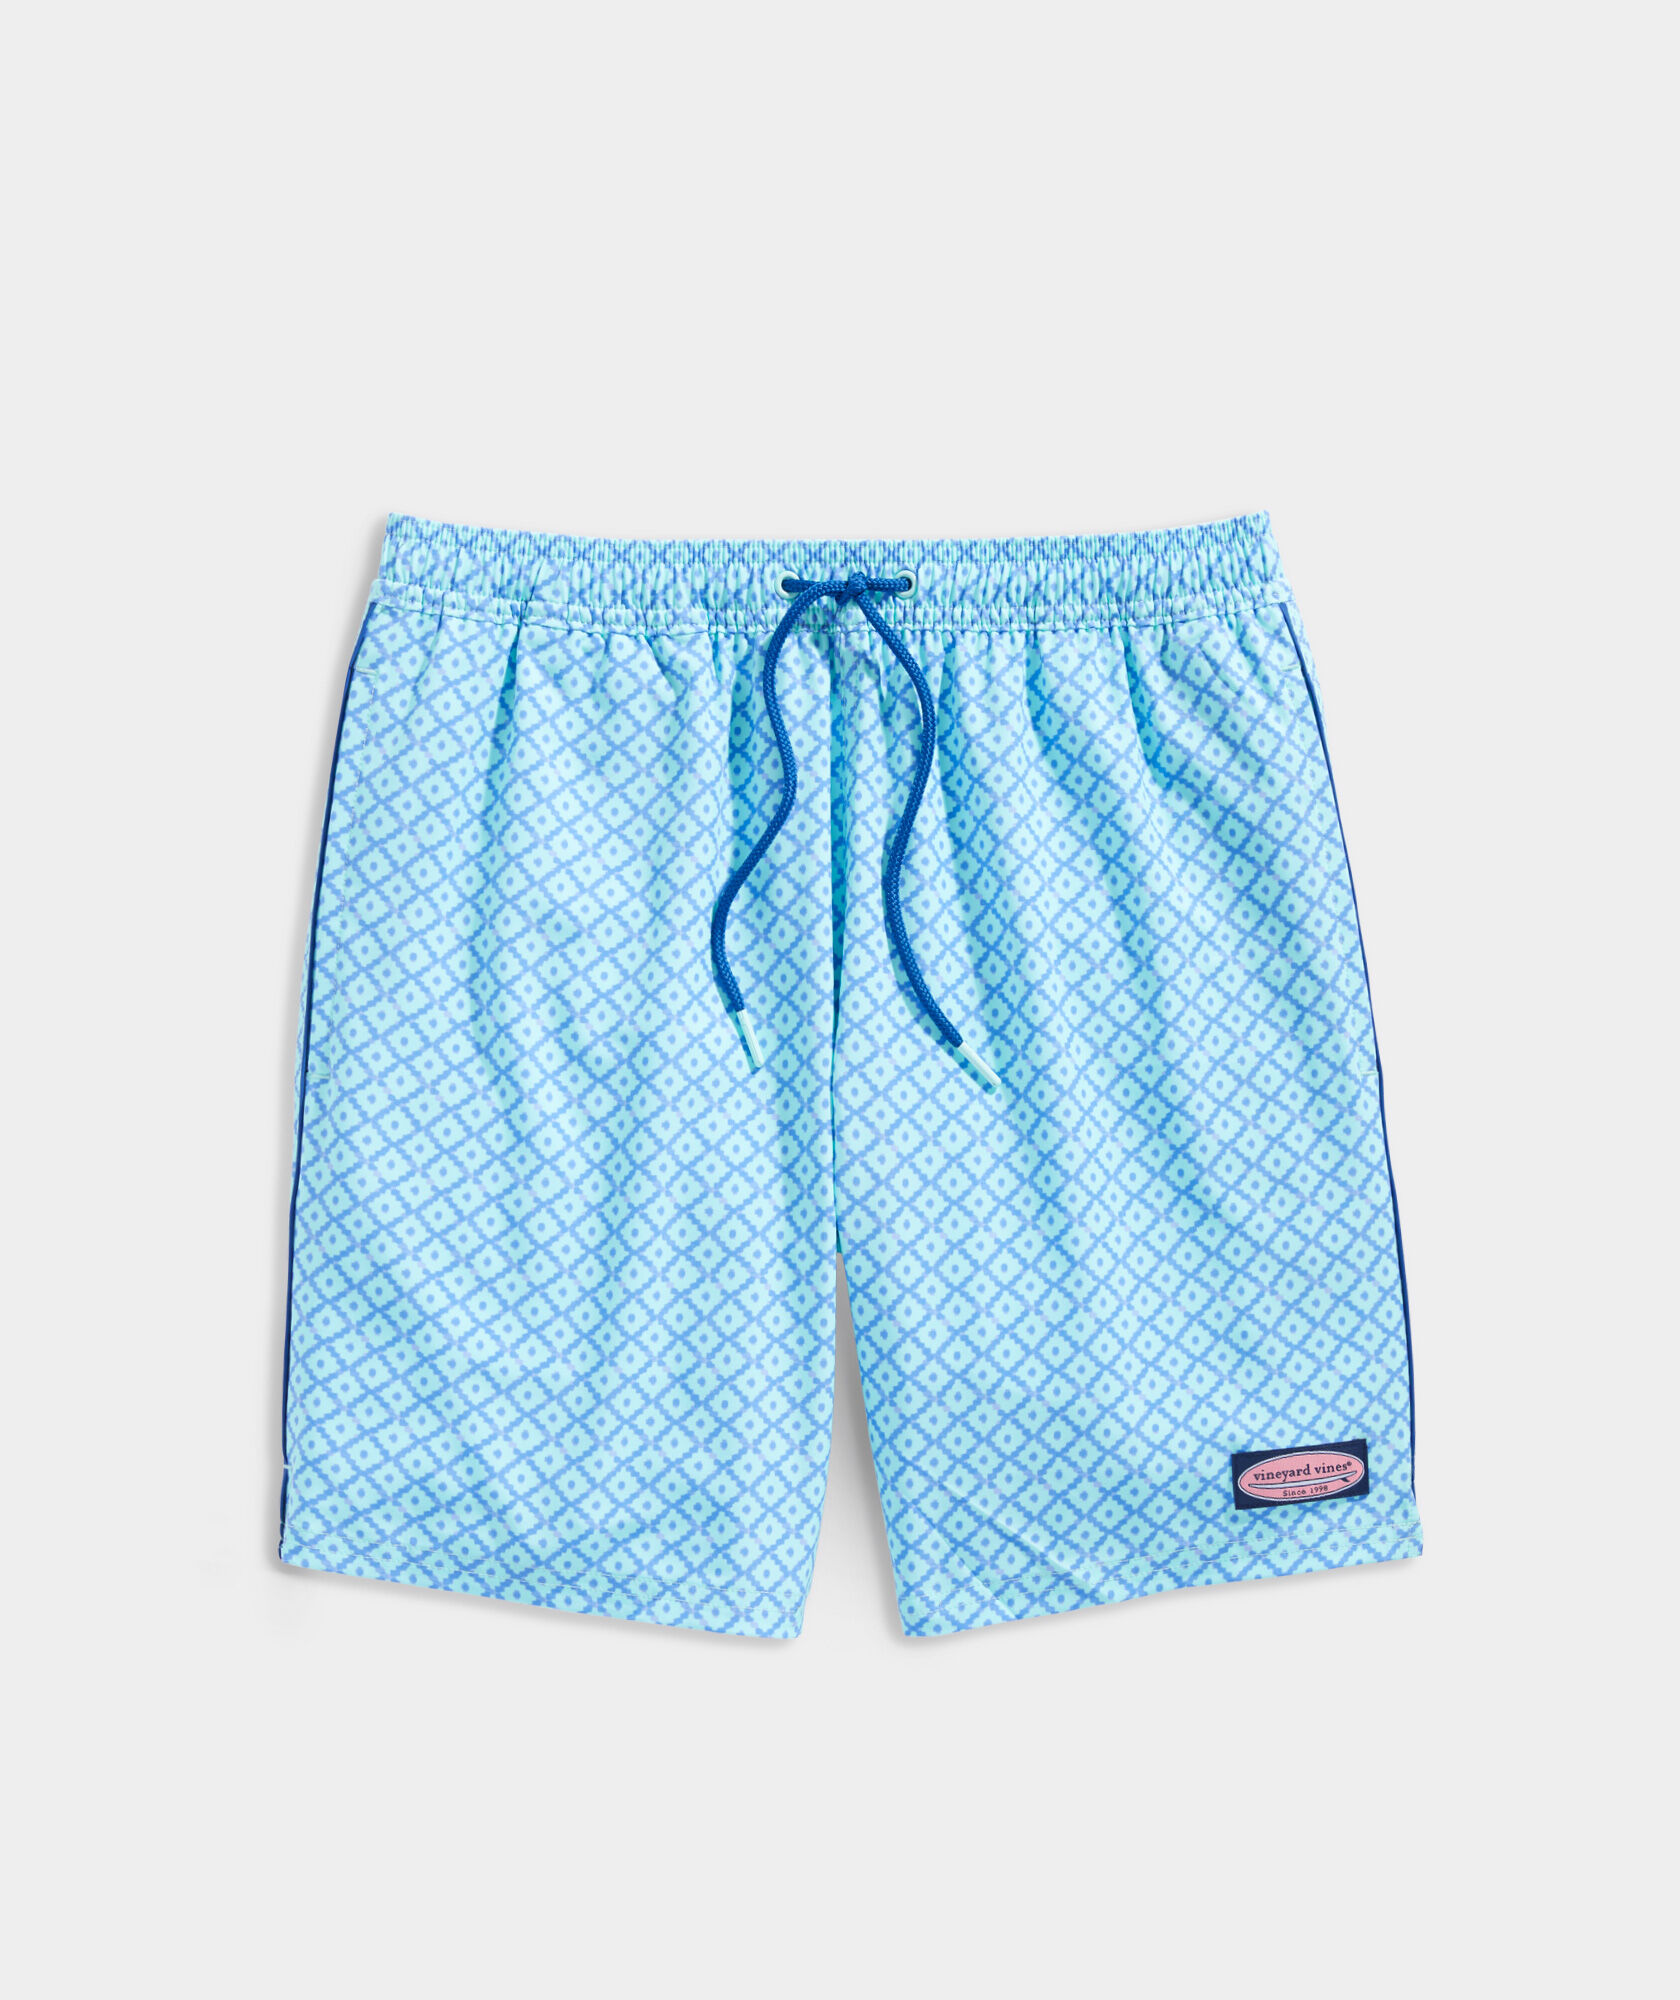 Men's Swim Trunks and Bathing Suits at vineyard vines